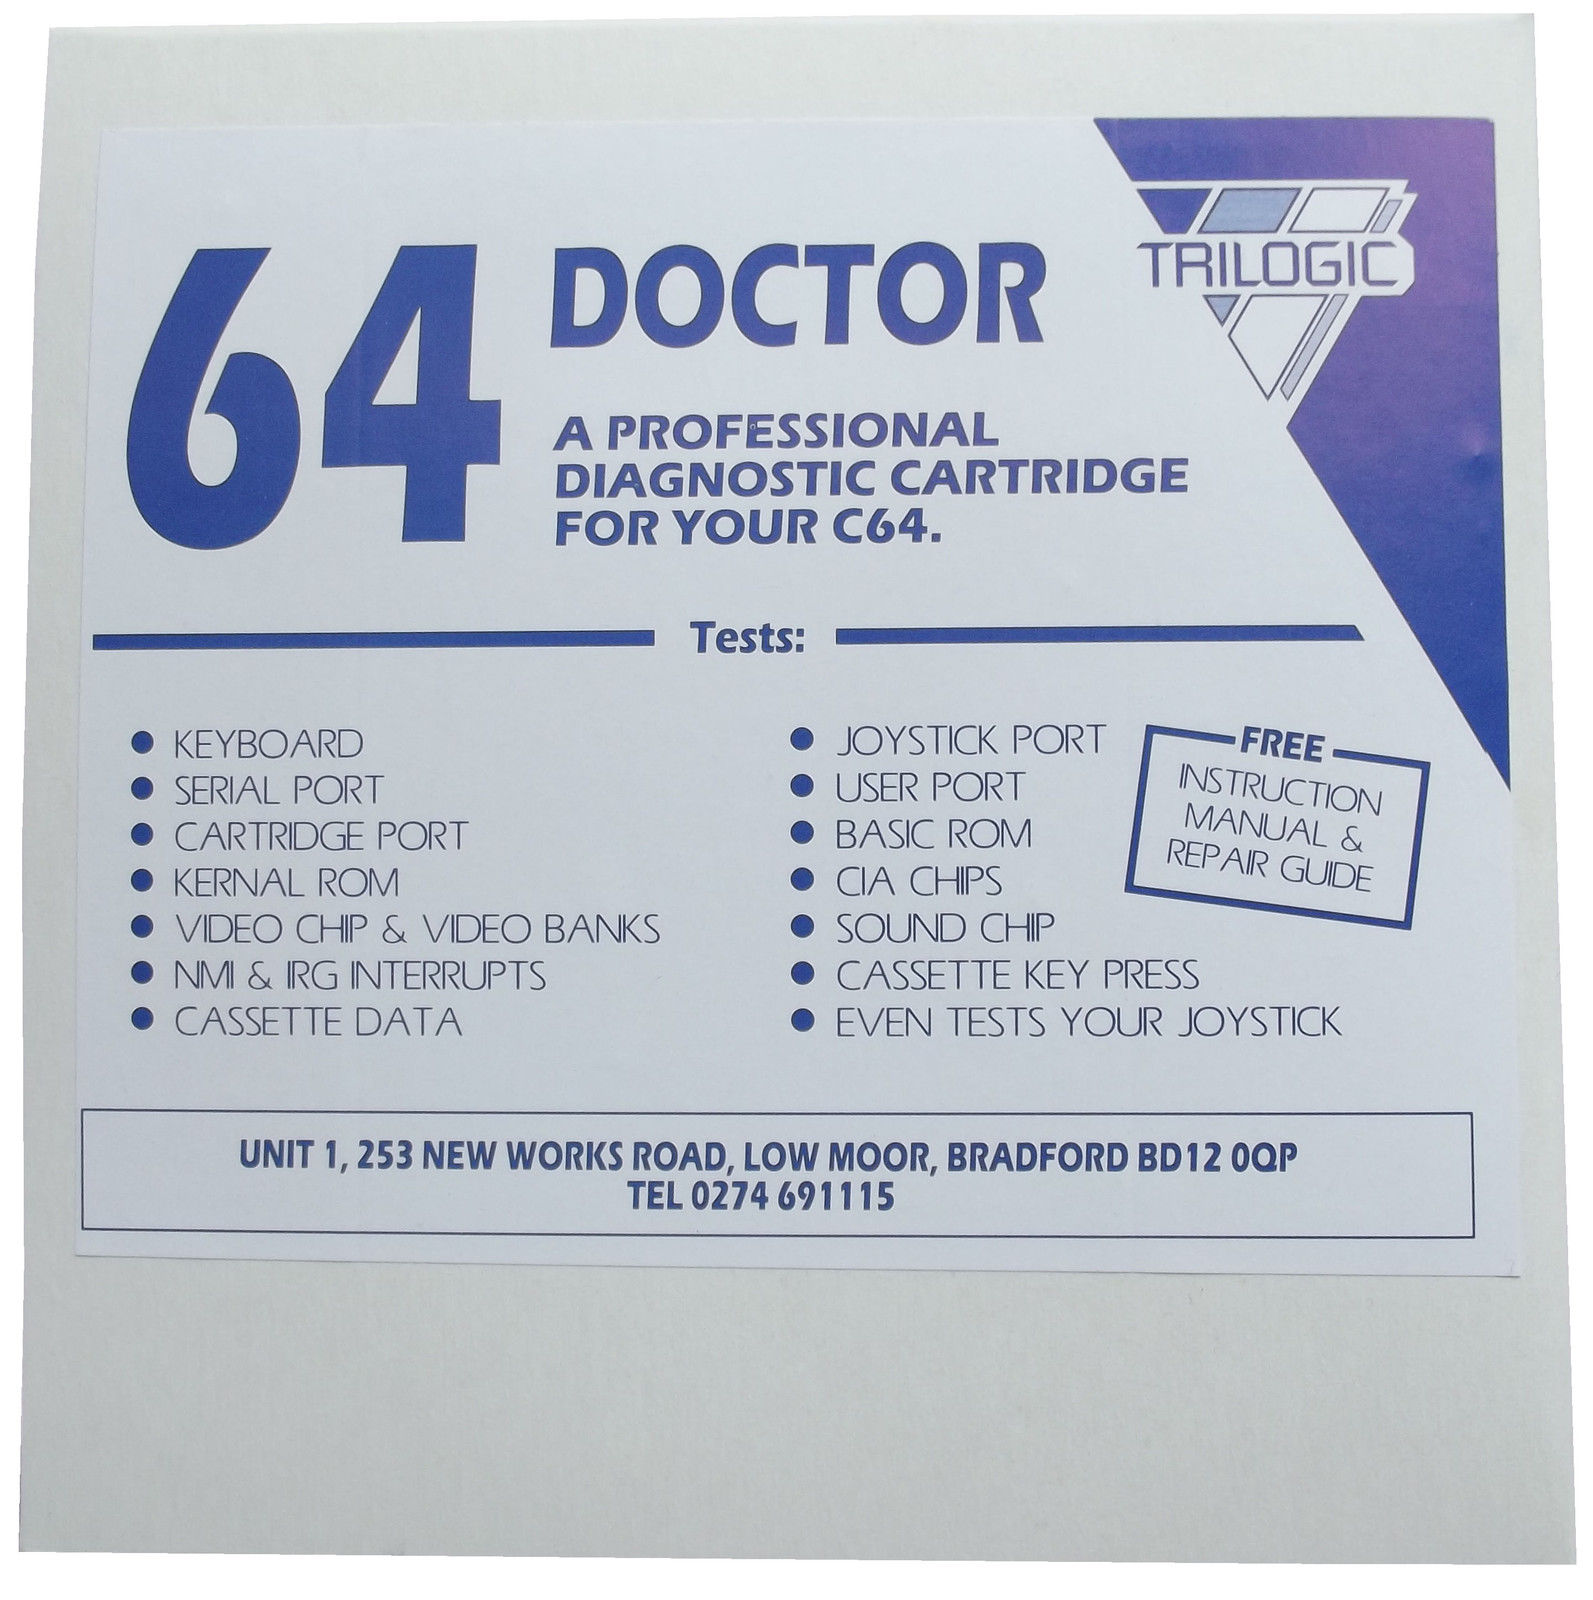 c64doctor2 64 Doctor TriLogic for Commodore 64 - Port Testers & Manual - GameDude Computers